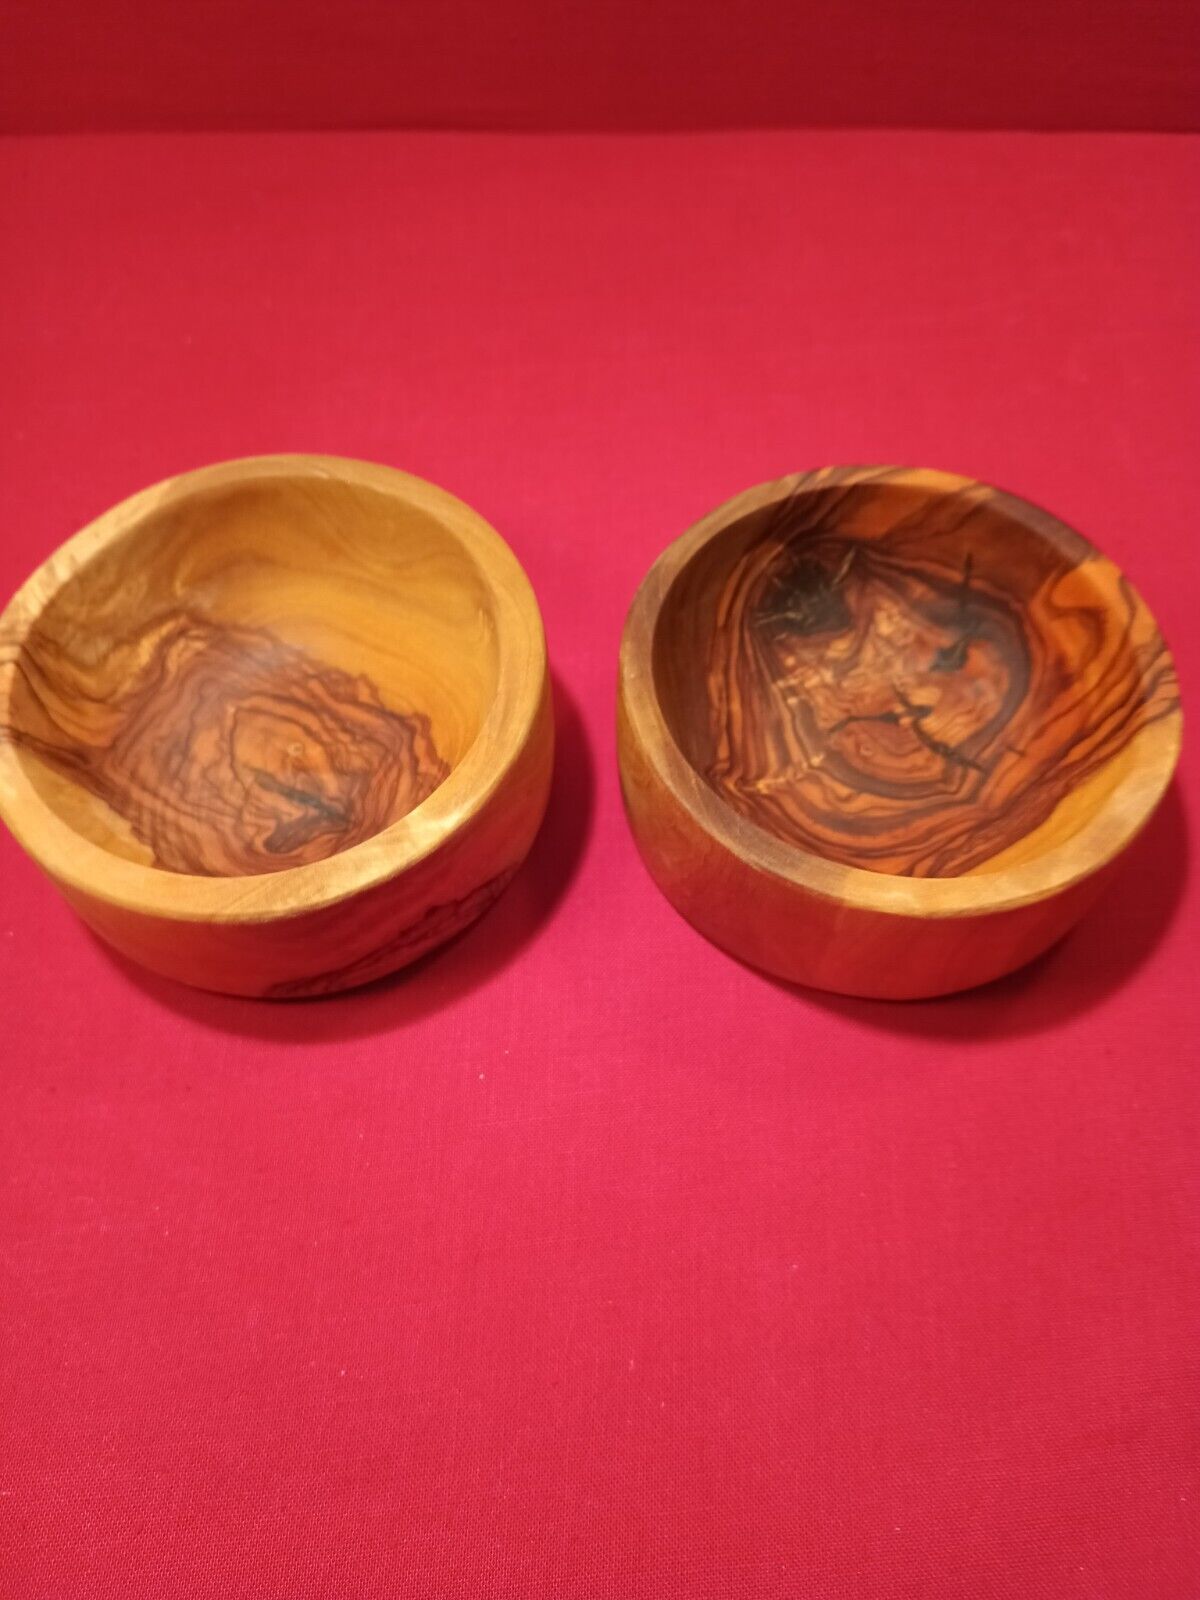 2 VINTAGE HAND CARVED STASH , RING DISH ,JEWELRY TRAY 3 INCH BEAUTIFULY CARVED